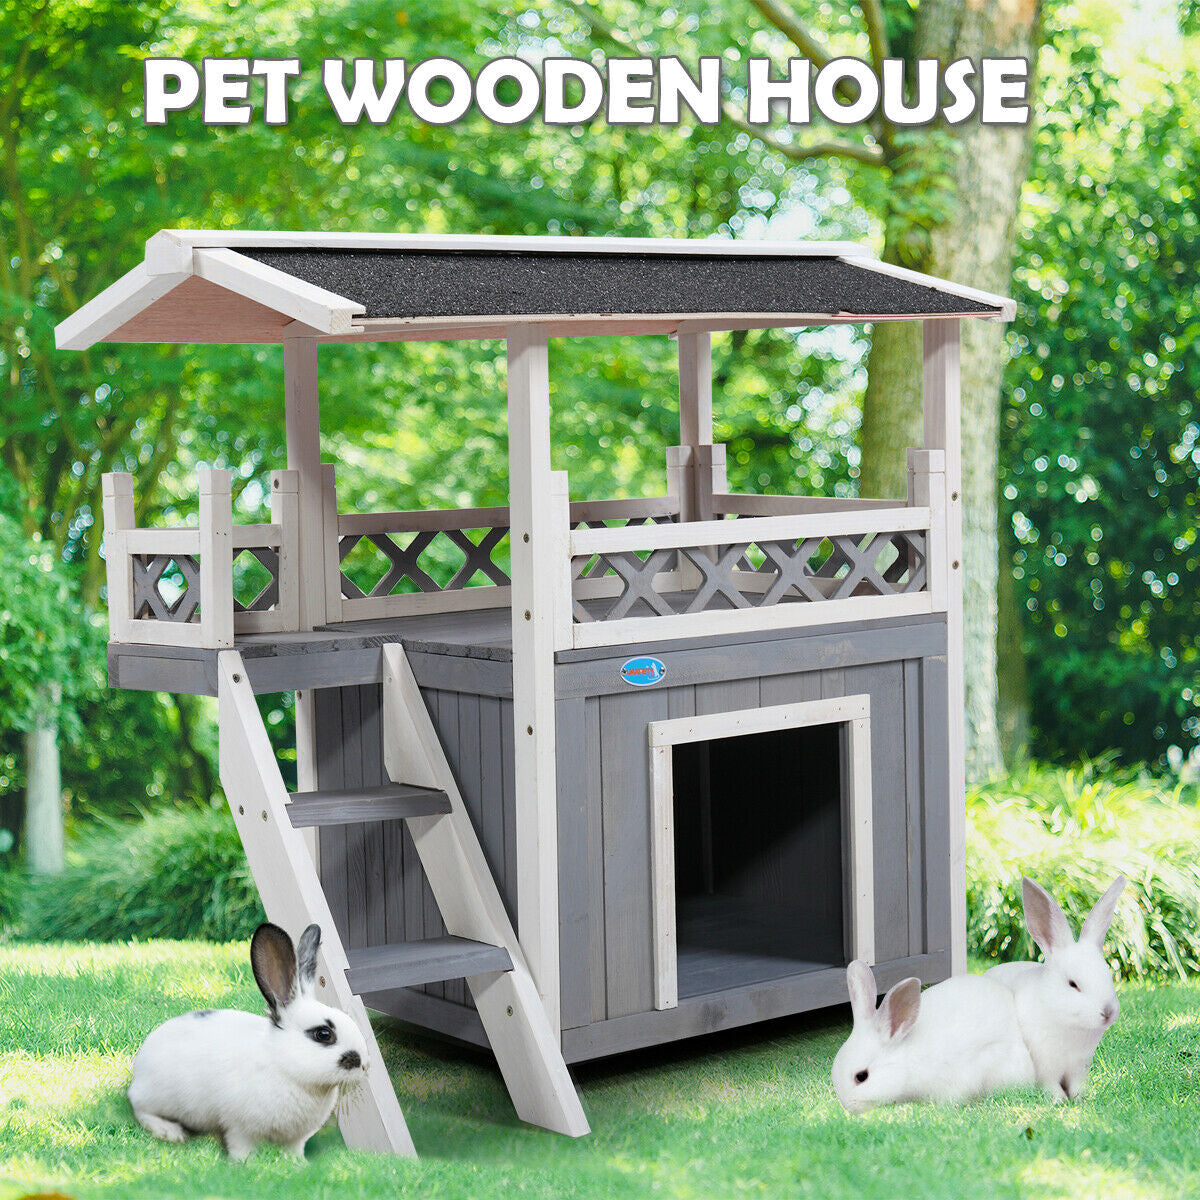 Lowestbest Dog House, Natural Wooden Dog House Home with Steps Balcony Puppy Stairs, Outdoor Weather-Resistant Cat Condo Pet House